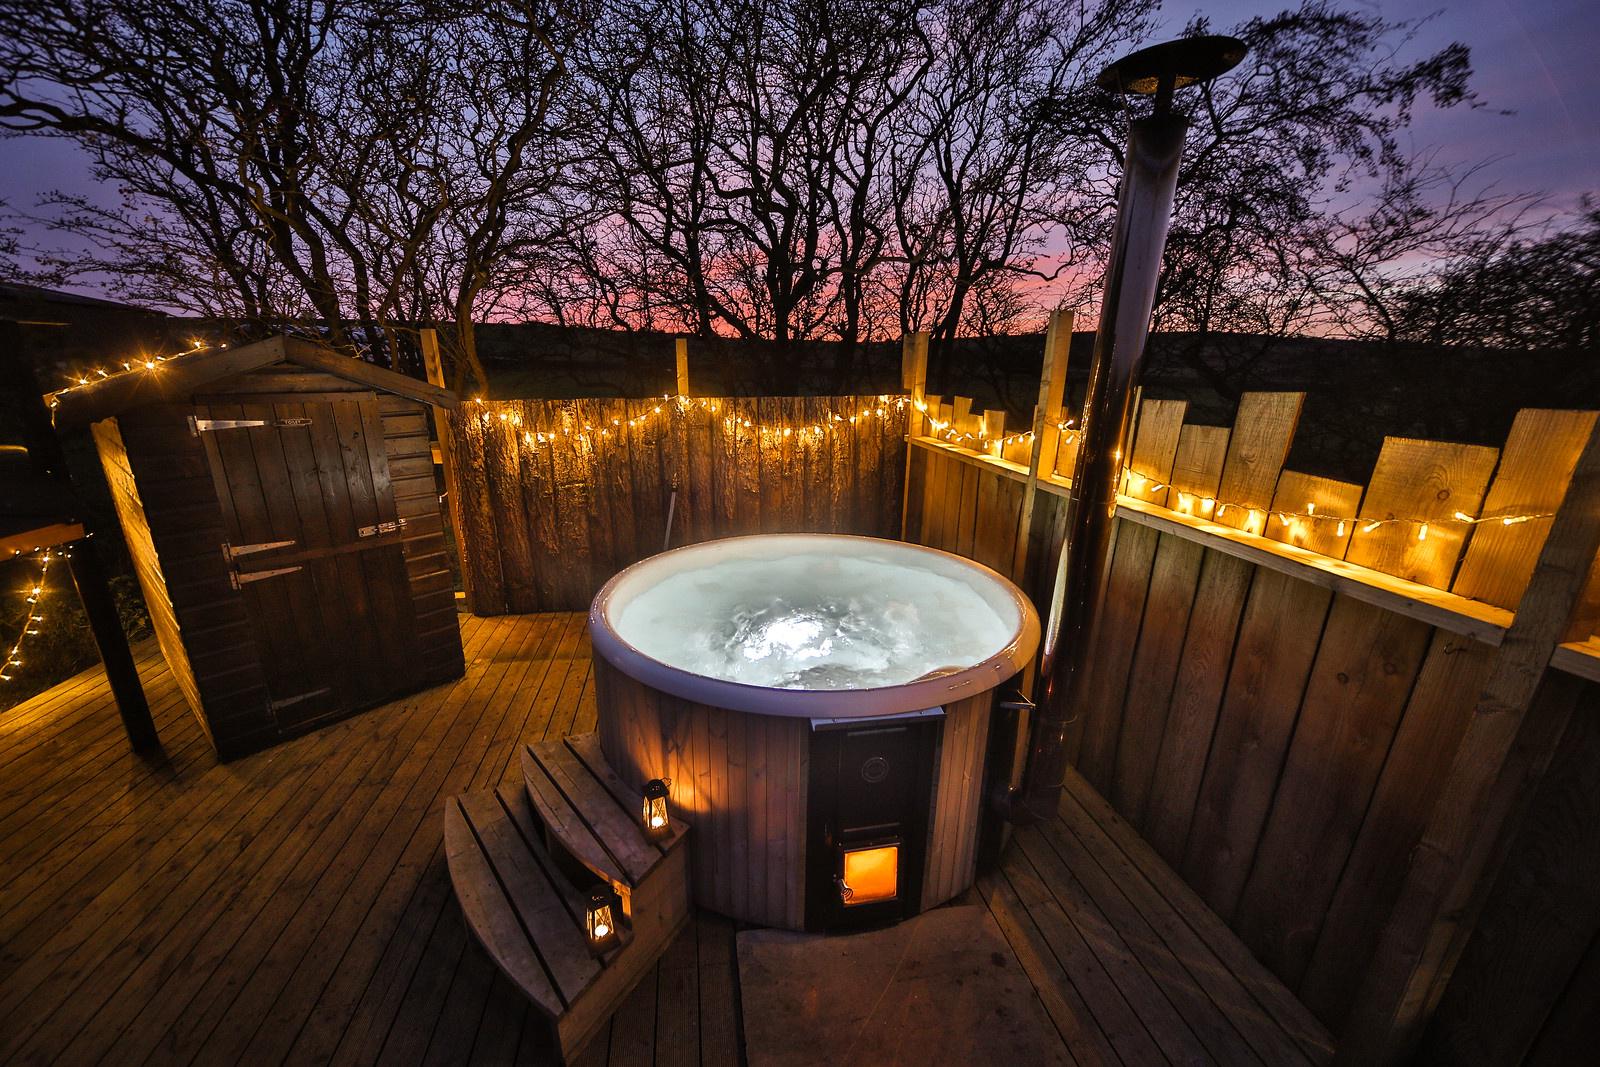 Glamping Sites With Hot Tubs The Very Best Hot Tub Glamping Sites 3161